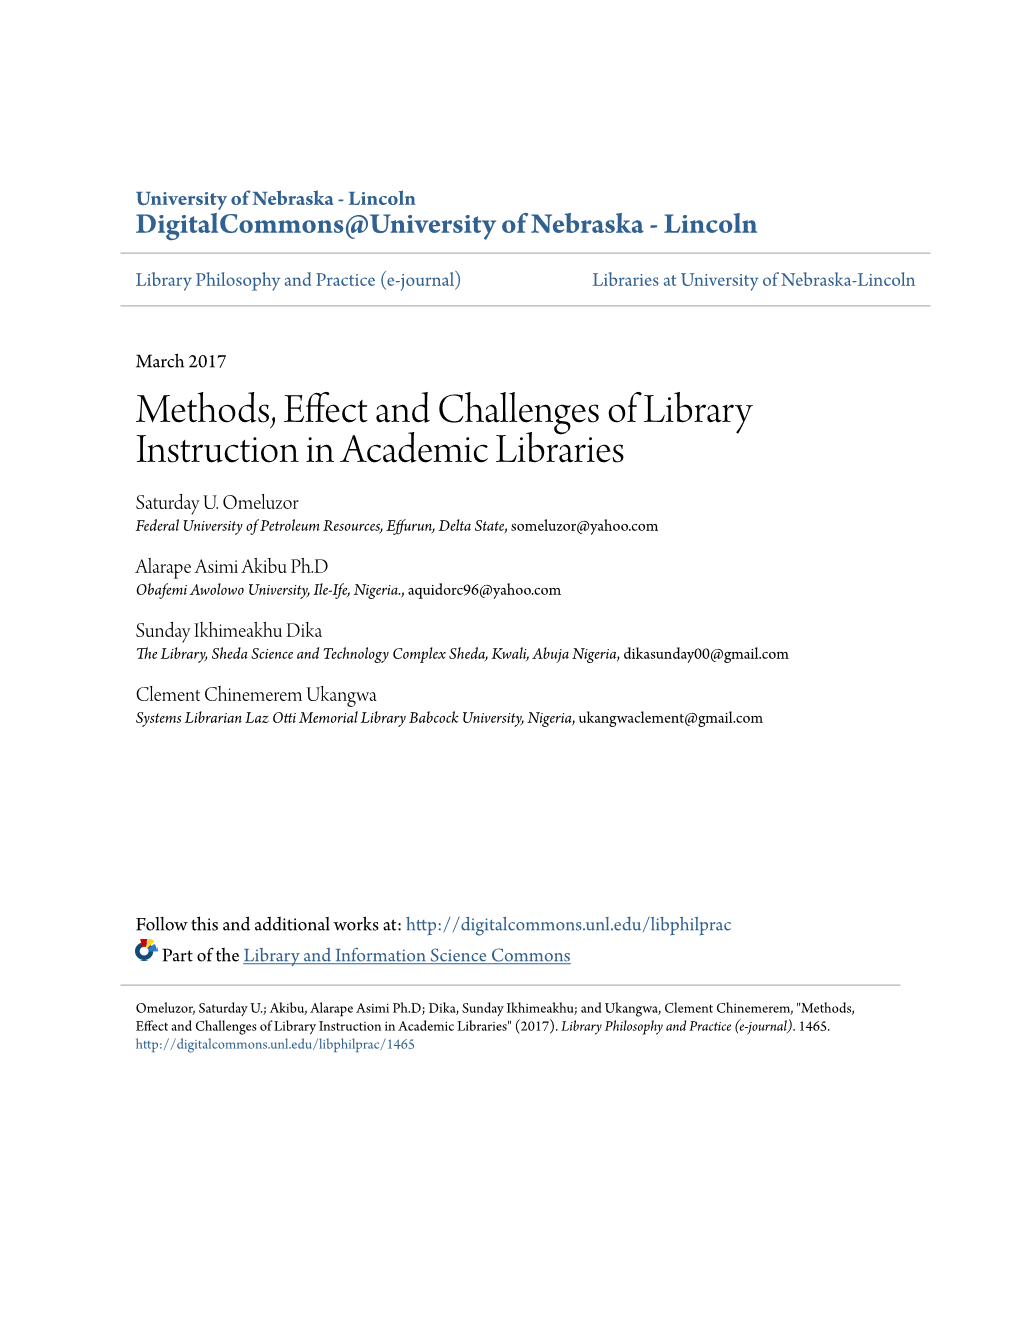 Methods, Effect and Challenges of Library Instruction in Academic Libraries Saturday U